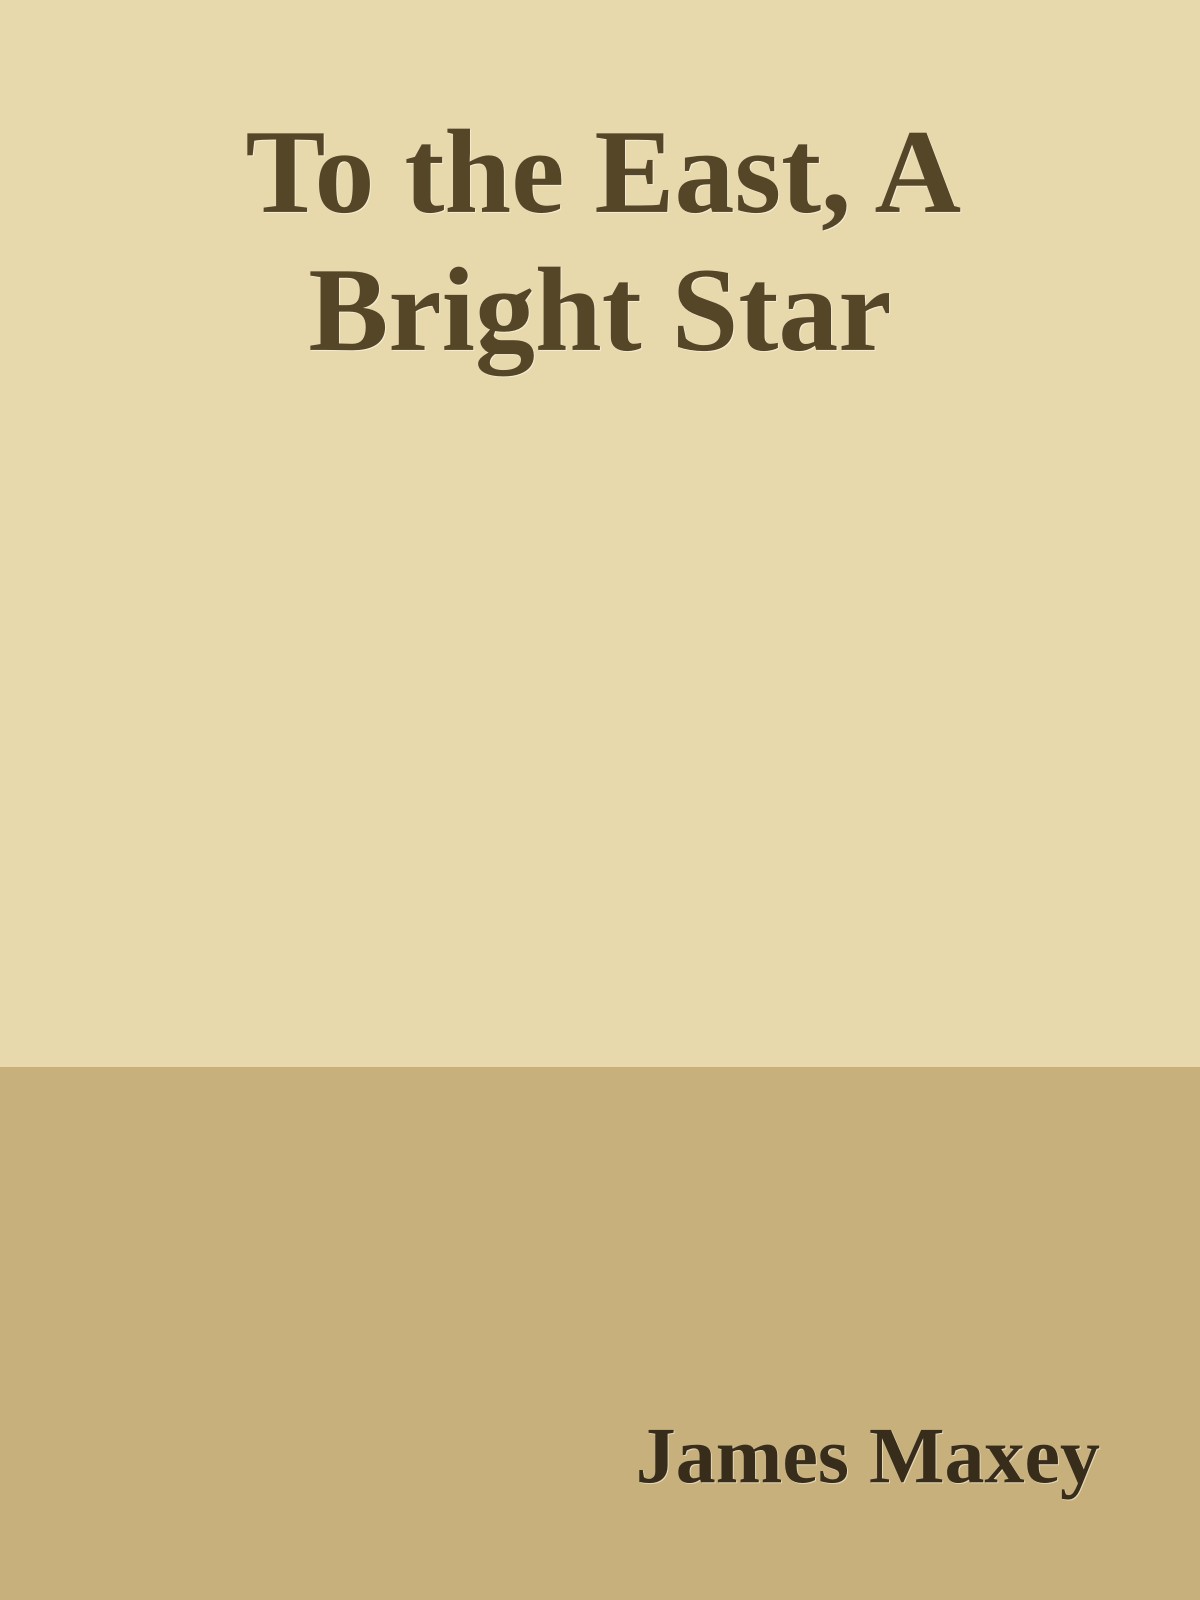 To the East, A Bright Star